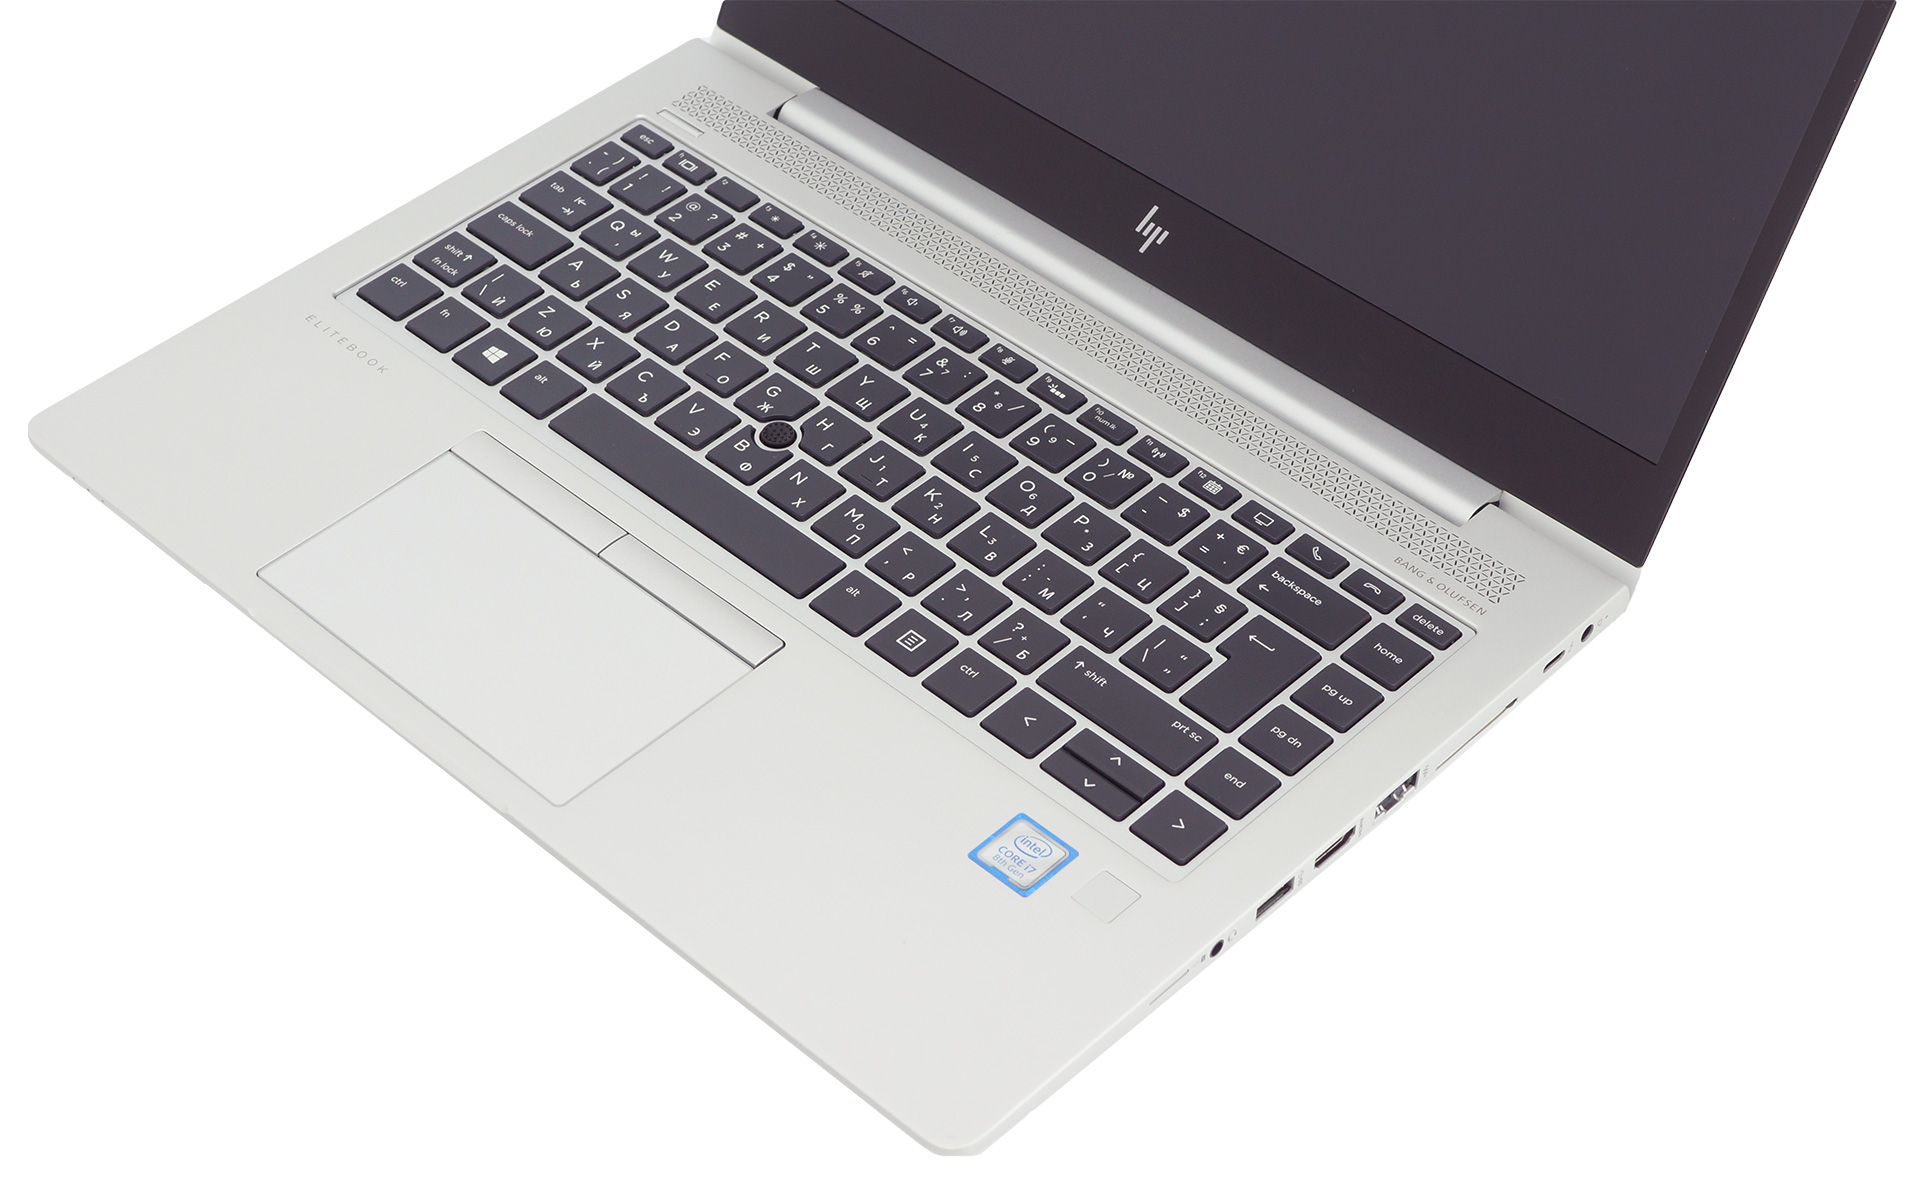 HP EliteBook 840 G6 review - one for the classy business people